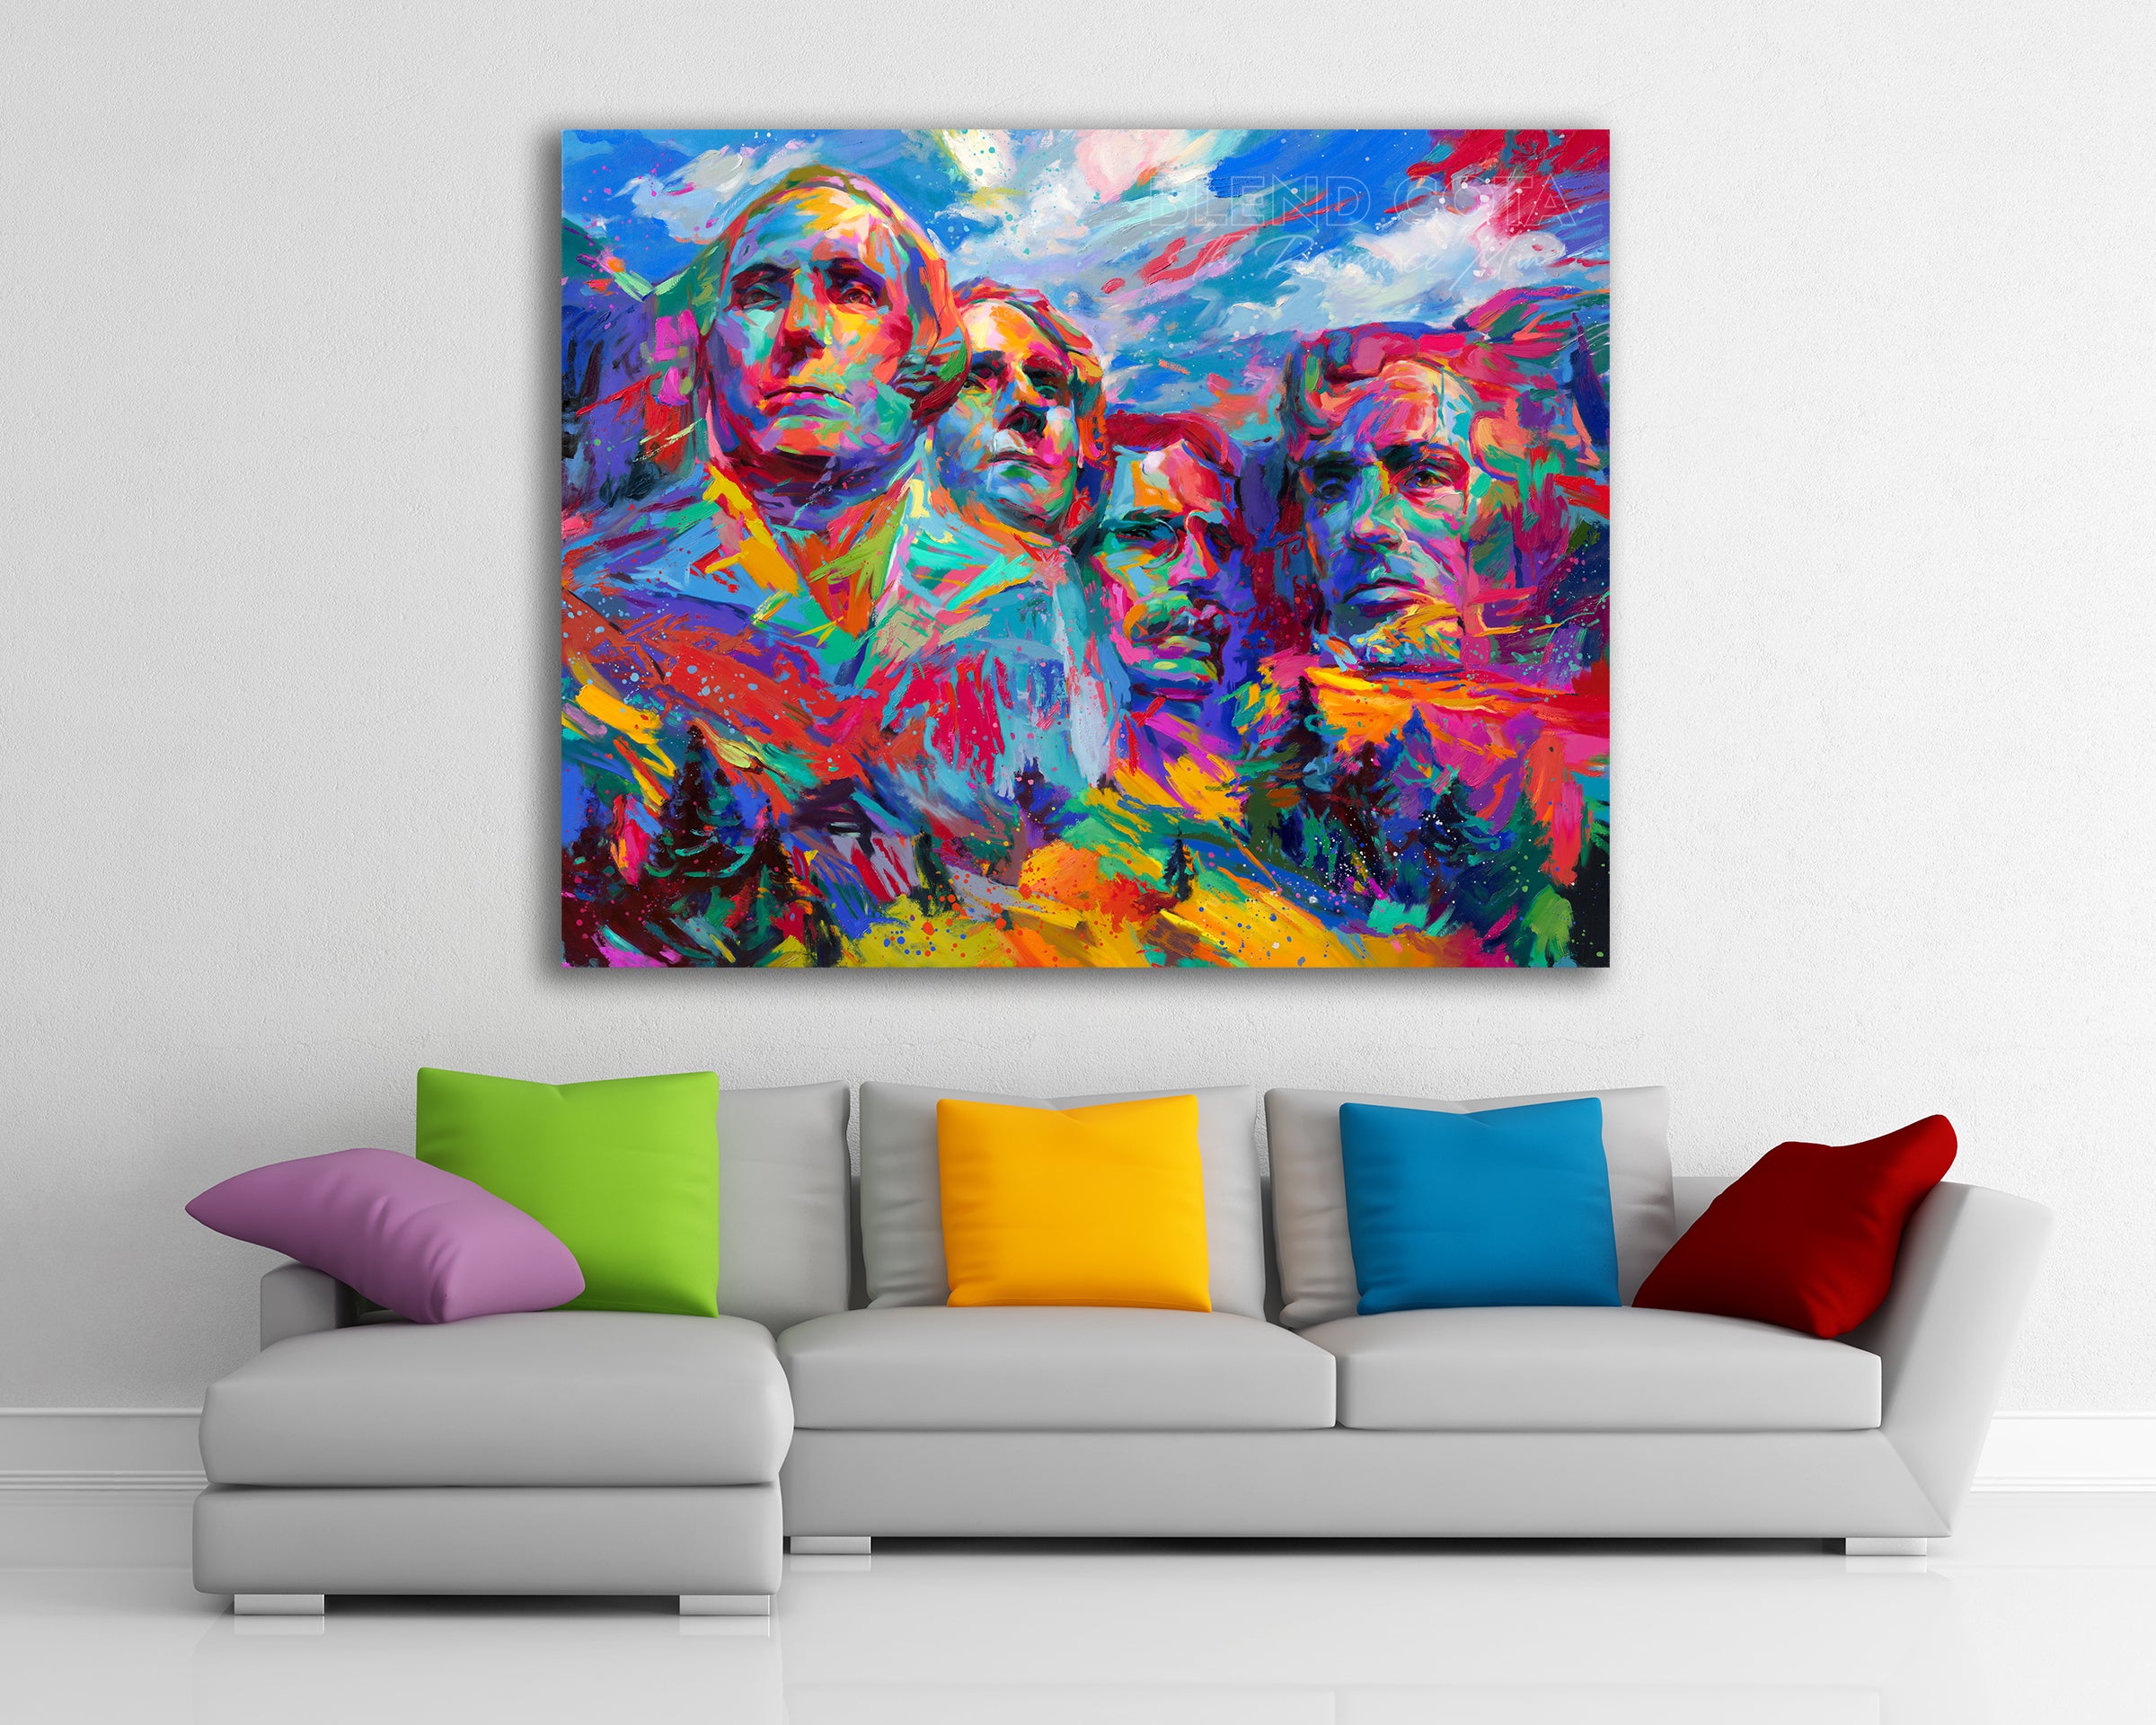 Mount Rushmore | Hope For a Brighter Future painted by Blend Cota limited edition art framed on canvas from Blend Cota Studios with painting hanging on a white wall behind a colorful couch